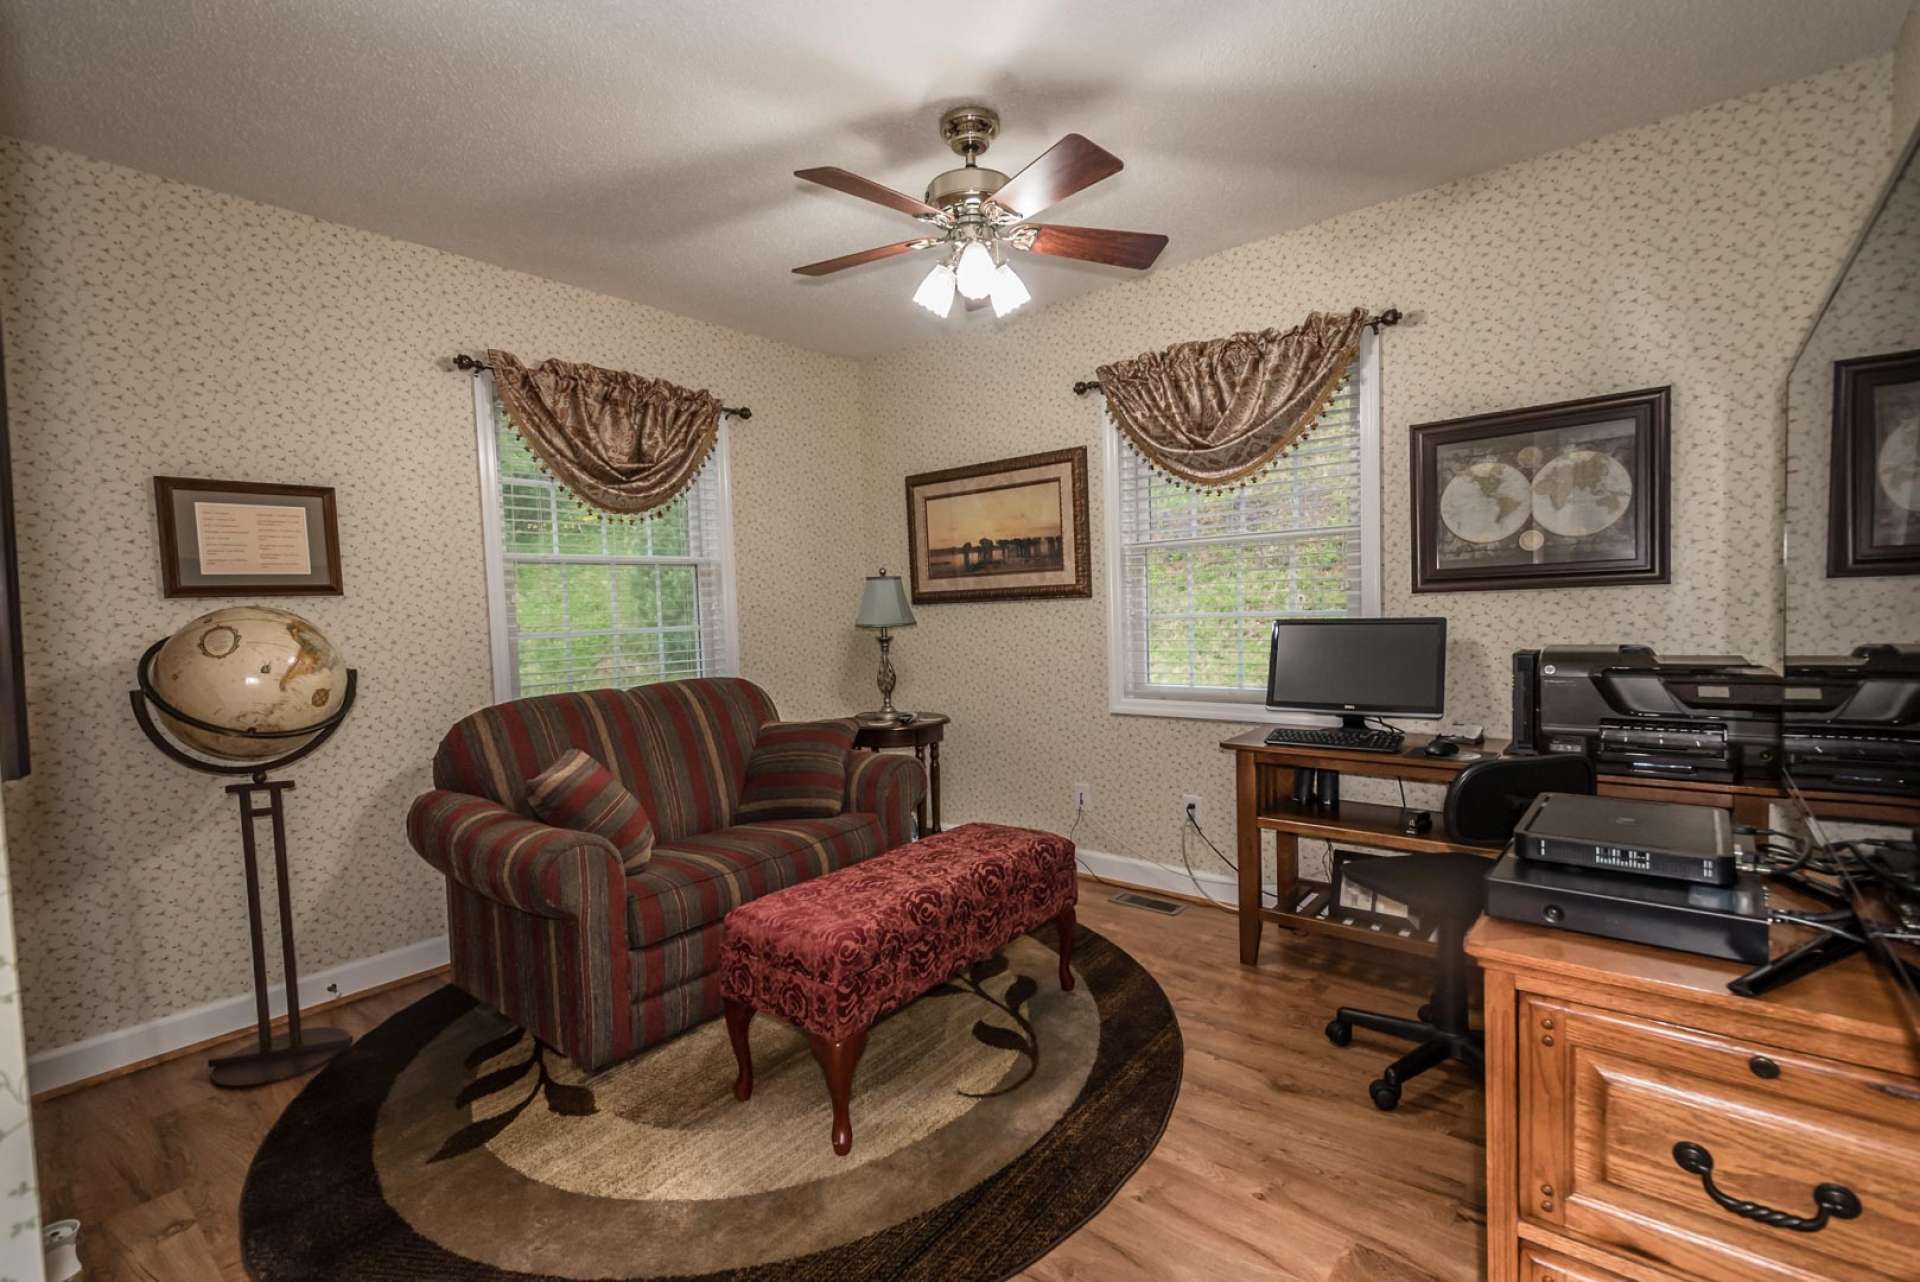 Also, located on the main level, is this amply sized room is currently utilized as a home office. A laundry room and half bath complete the main level.